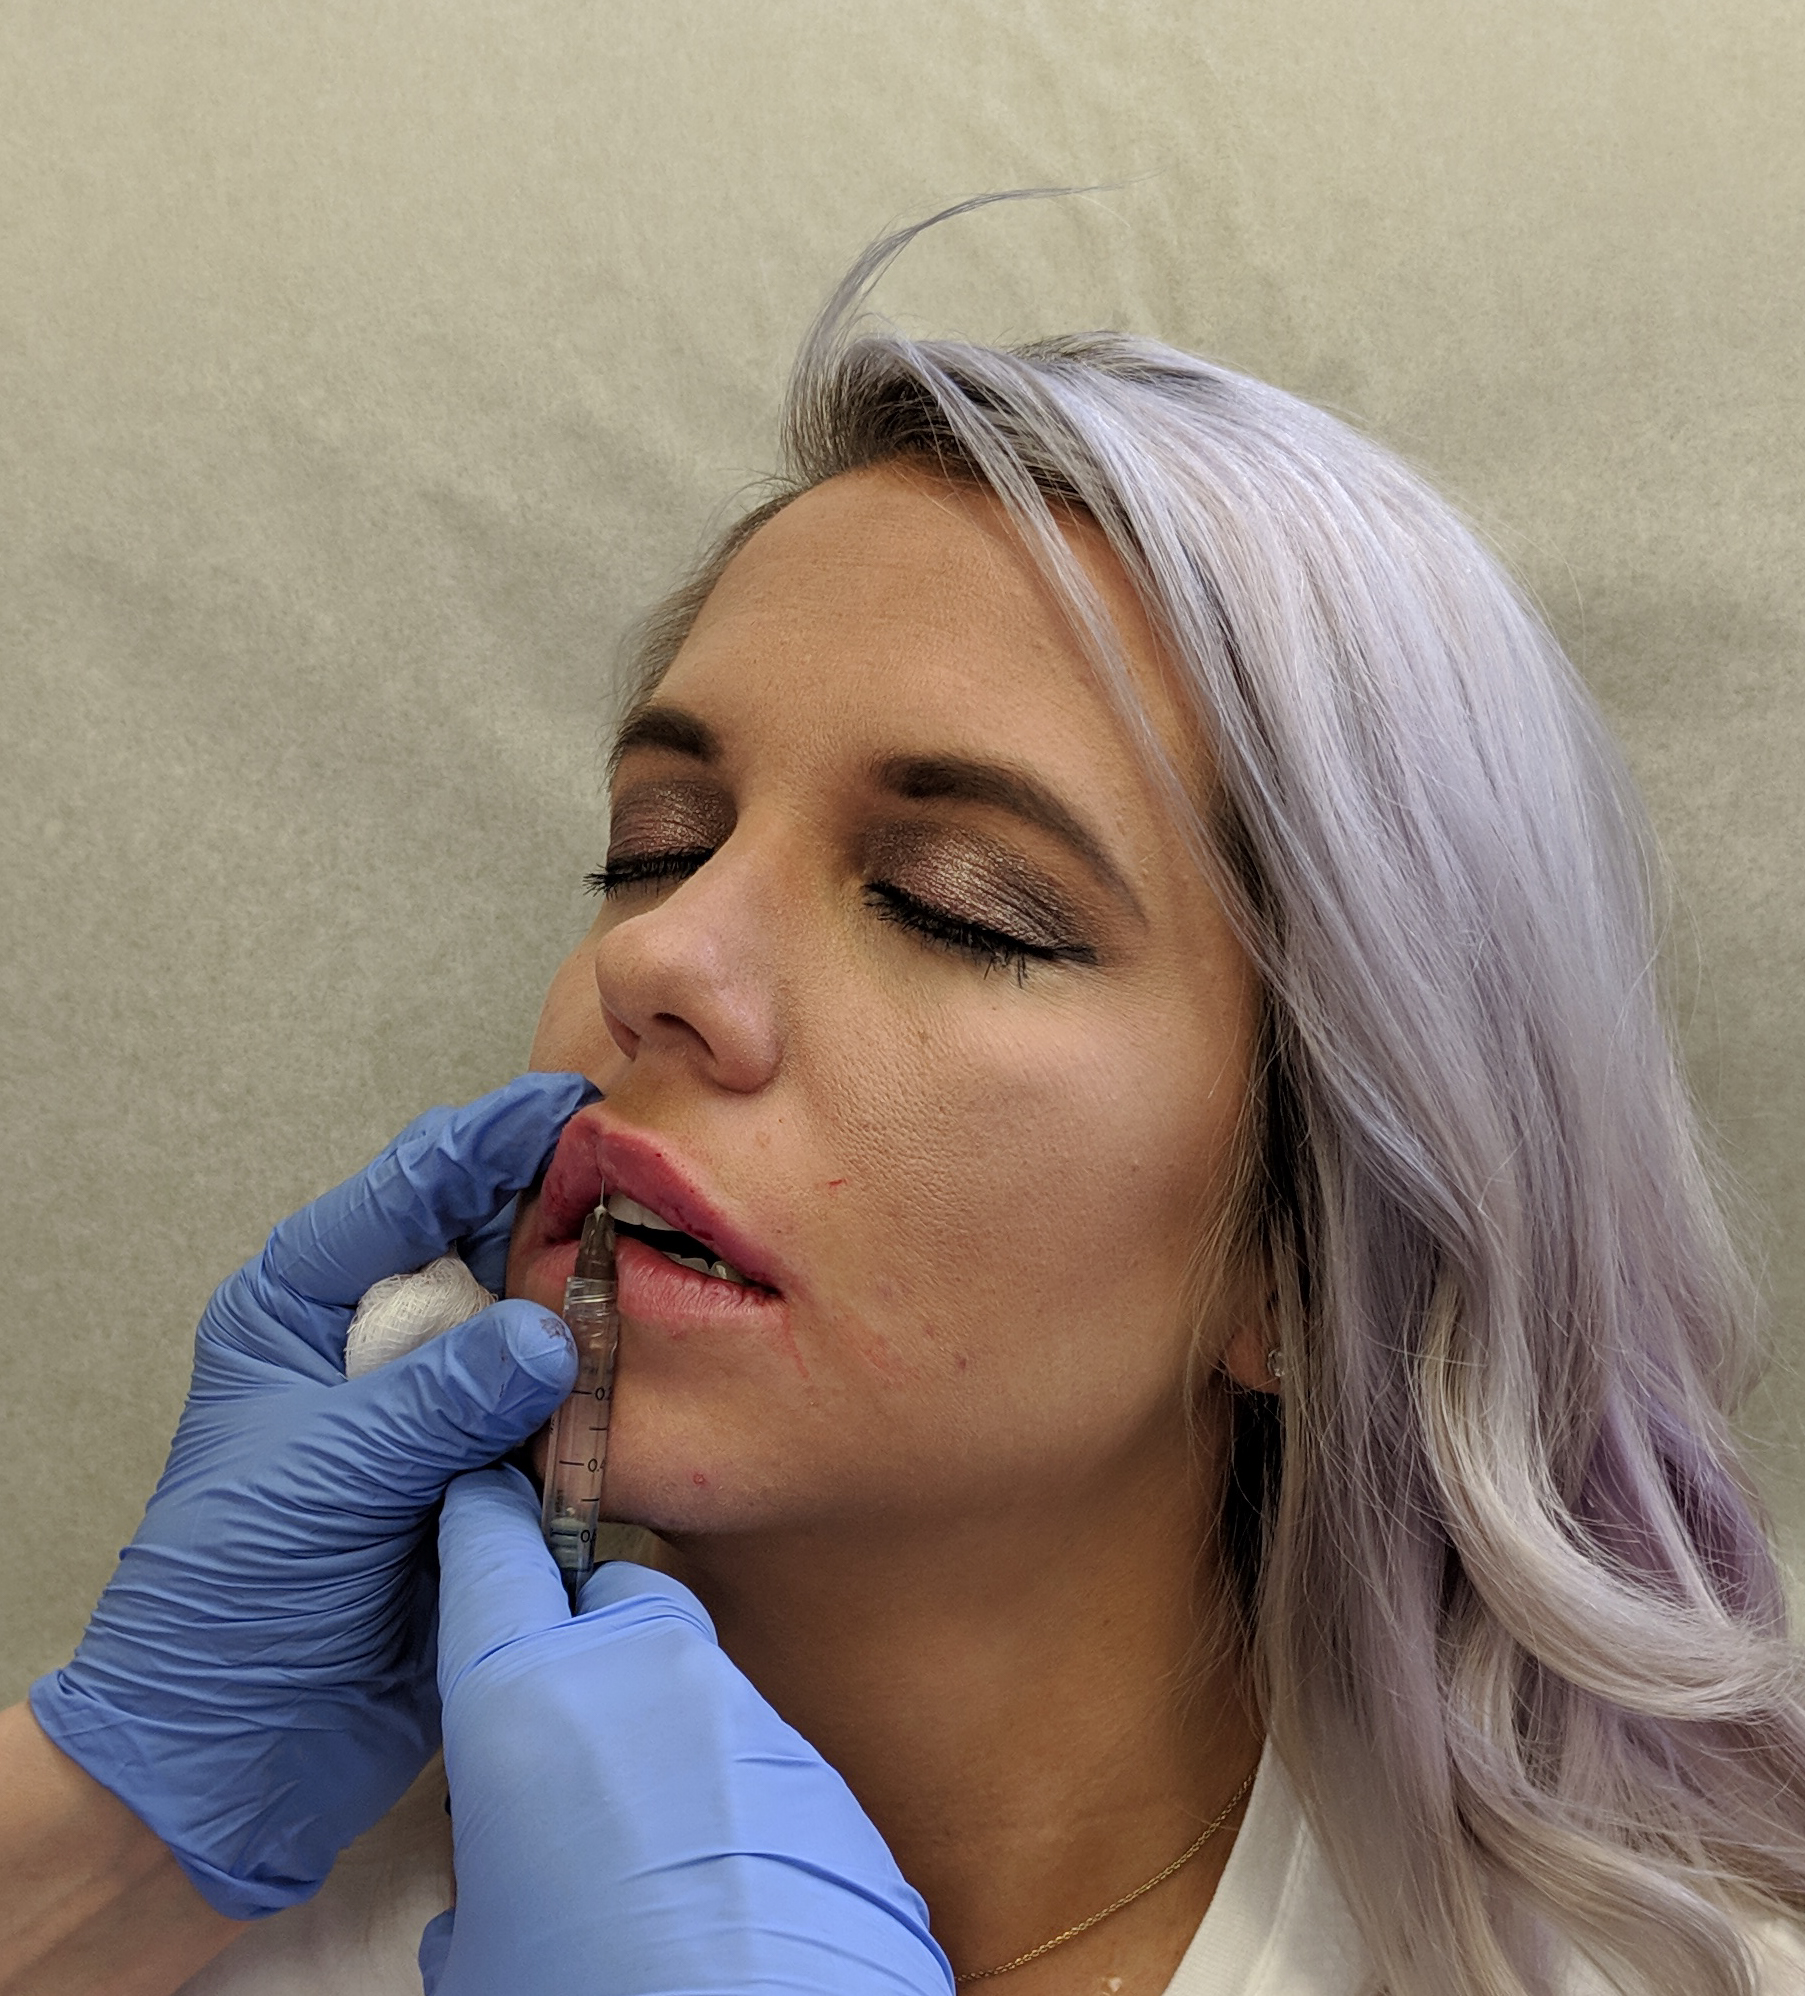 Are Lip Injections Worth It?: A before and after of lip injections using 0.5ml Restylane Defyne lip filler. Do lip injections hurt? What is getting lip injections like? And the best place for lip injections in Kansas City Olathe, Johnson County Dermatology review.